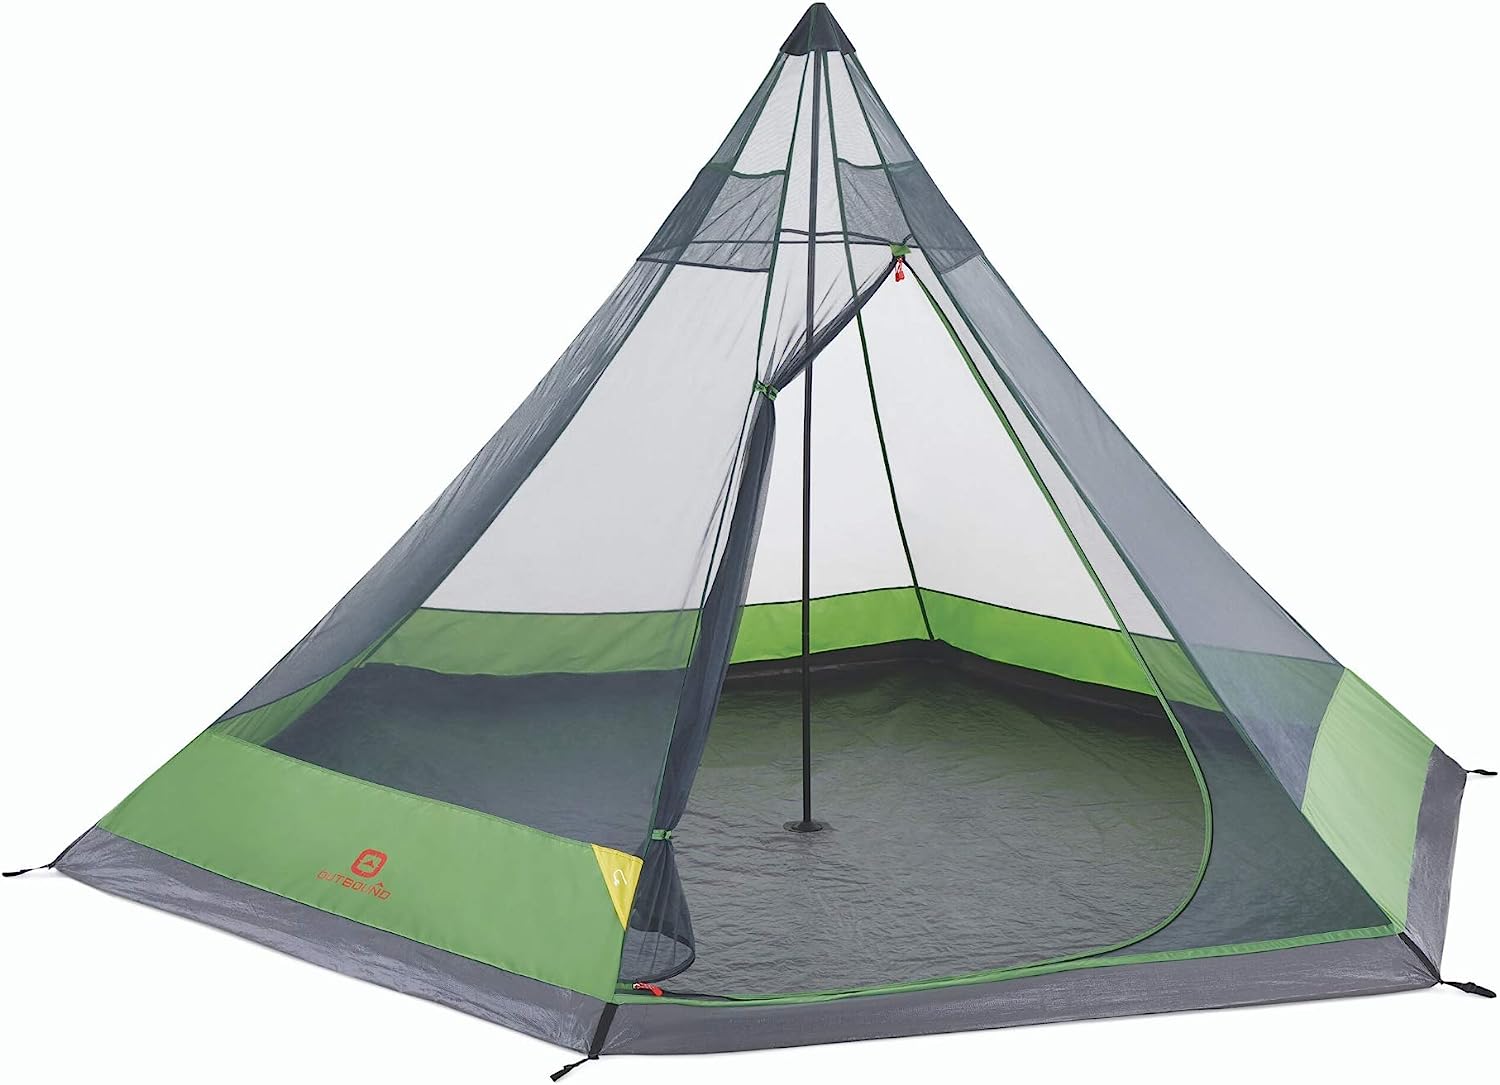 Outbound Pyramid Tent For 6 Person